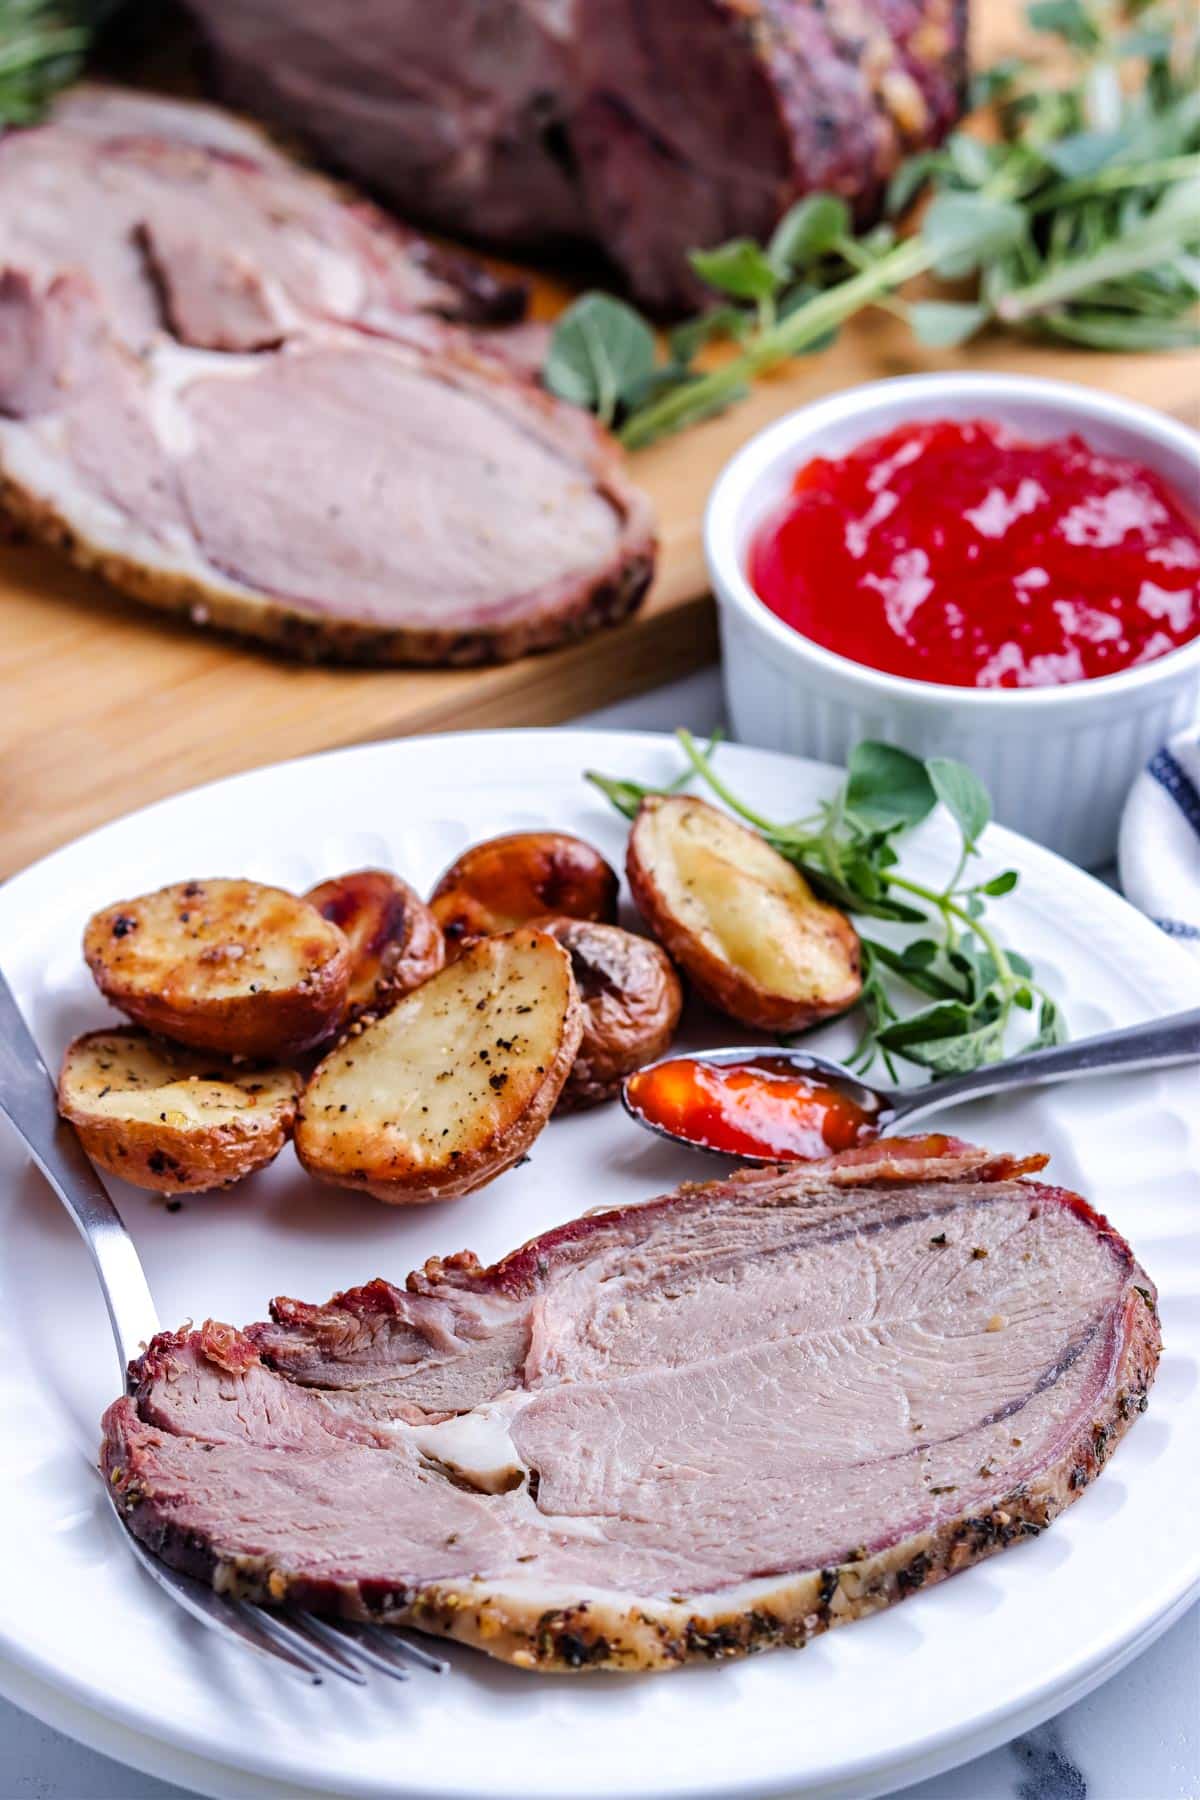 A slice of the Smoked Lamb on a white plate with pepper jelly and roasted potatoes.